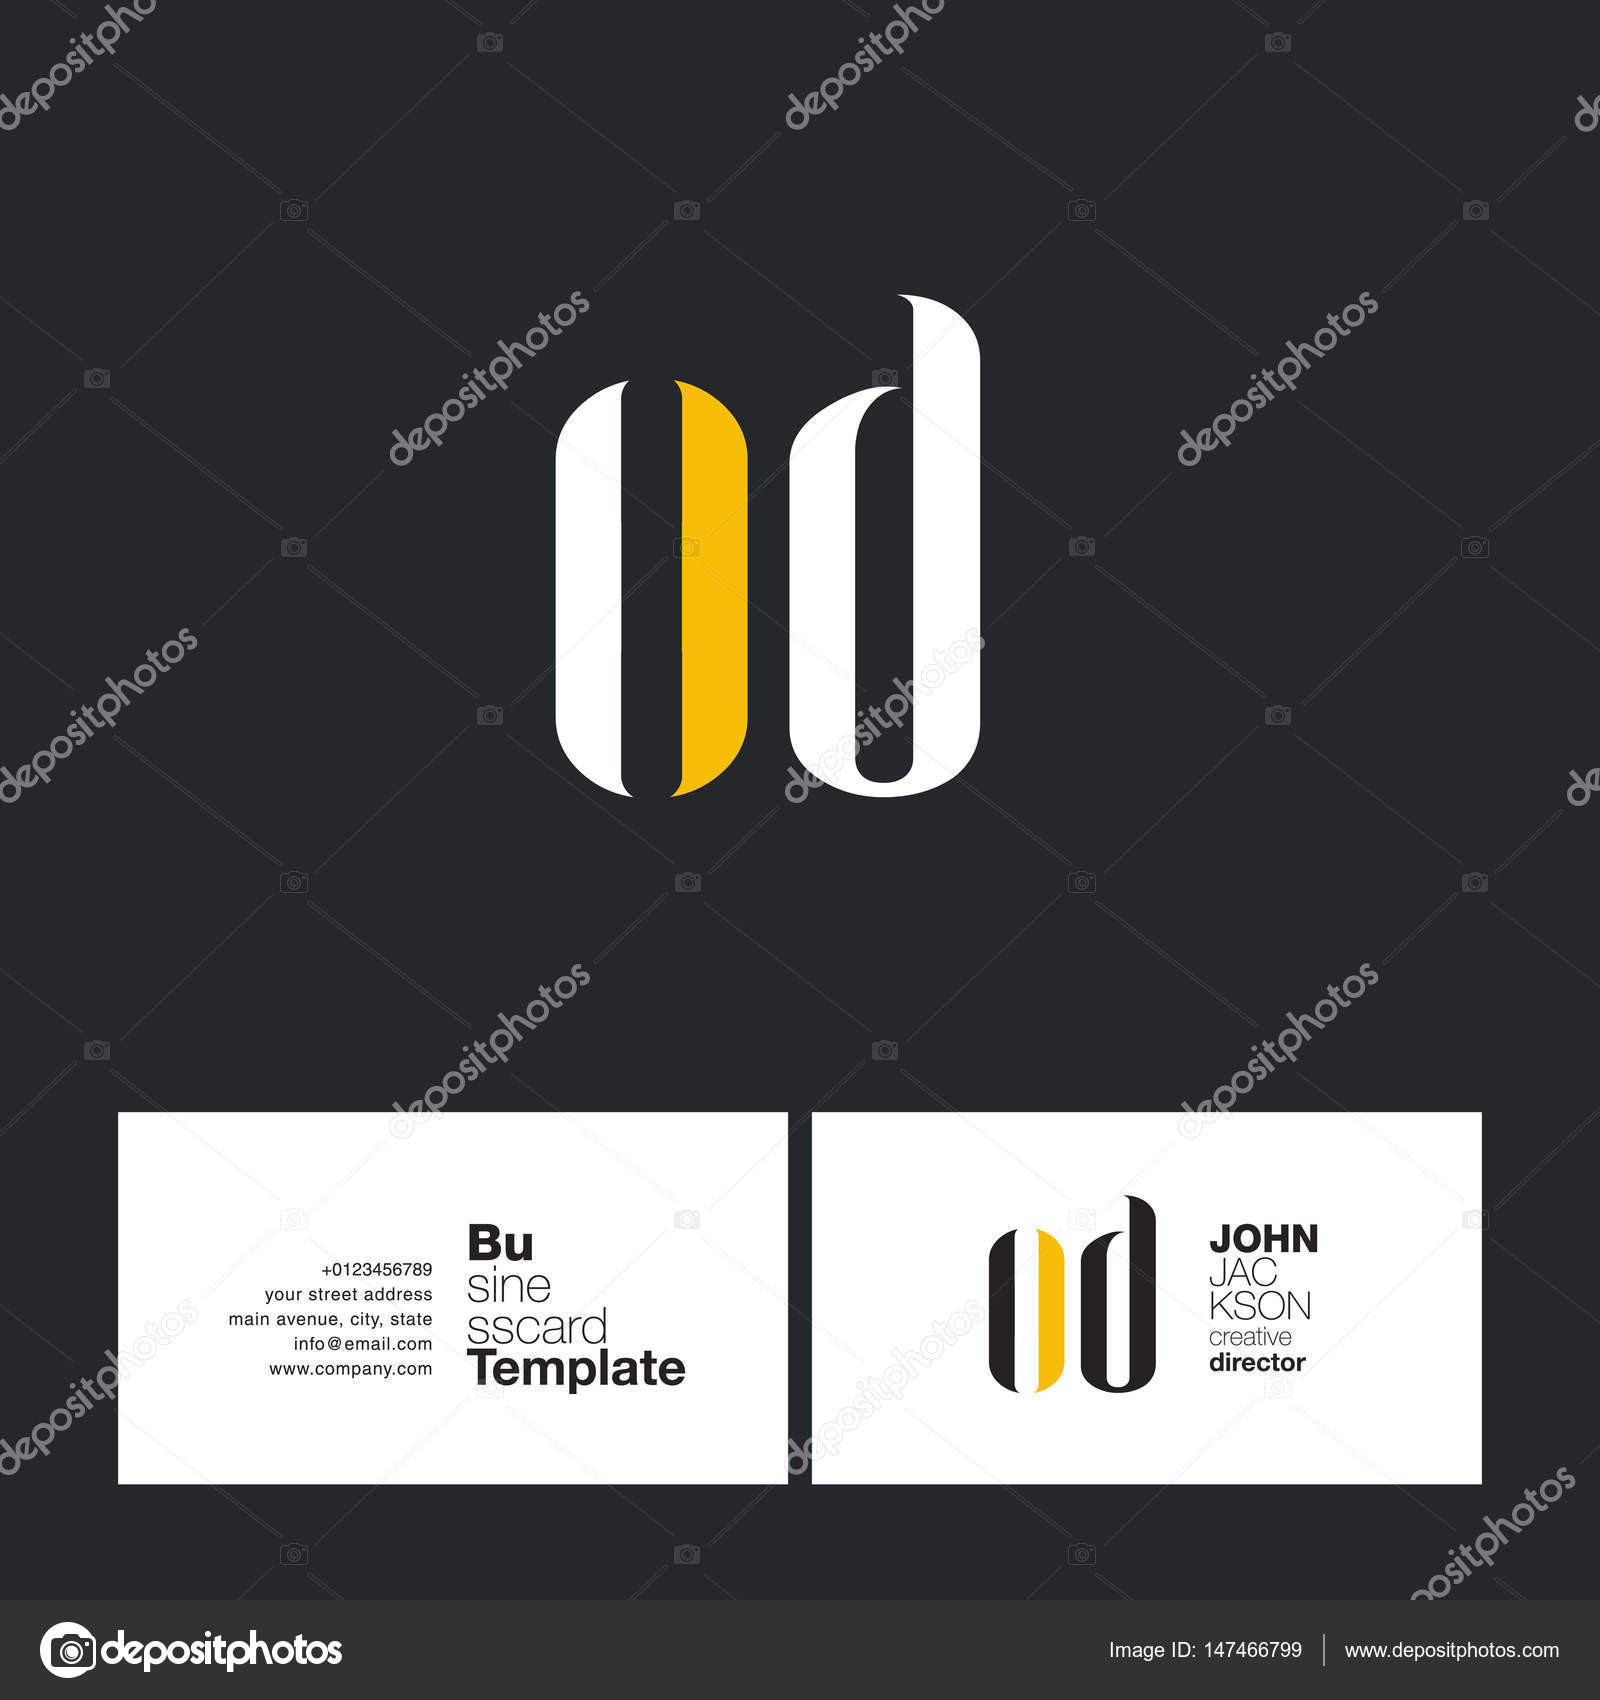 Sample Business Card Templates Free Download Fresh Design Of Free Music Business Card Templates